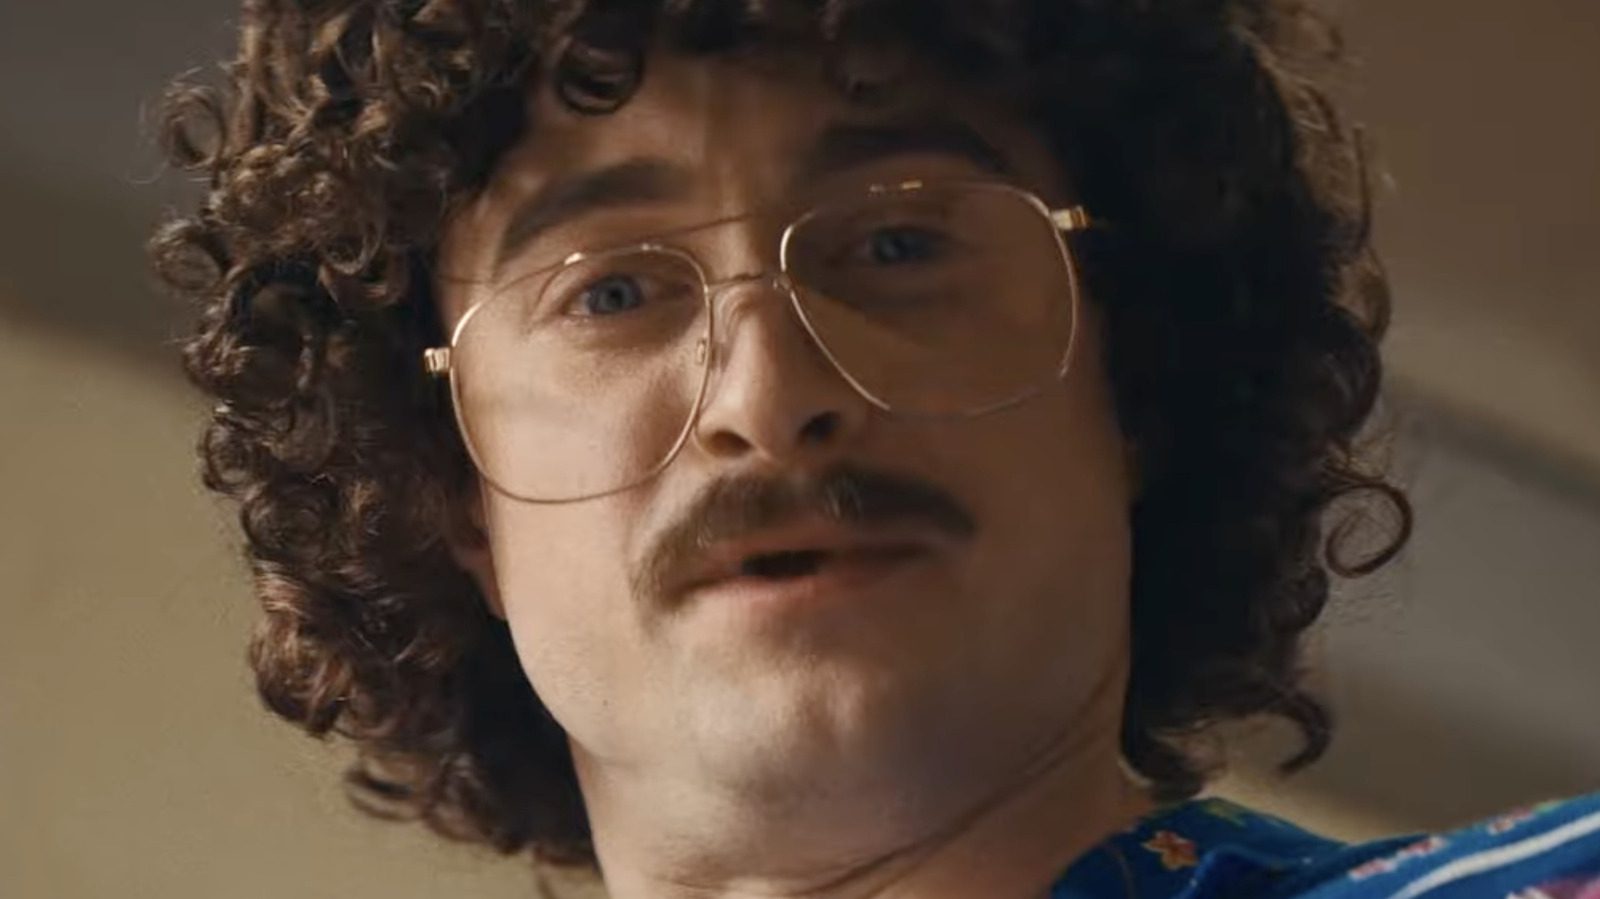 Daniel Radcliffe Goes Full Al In The New Trailer For Weird: The Al Yankovic Story